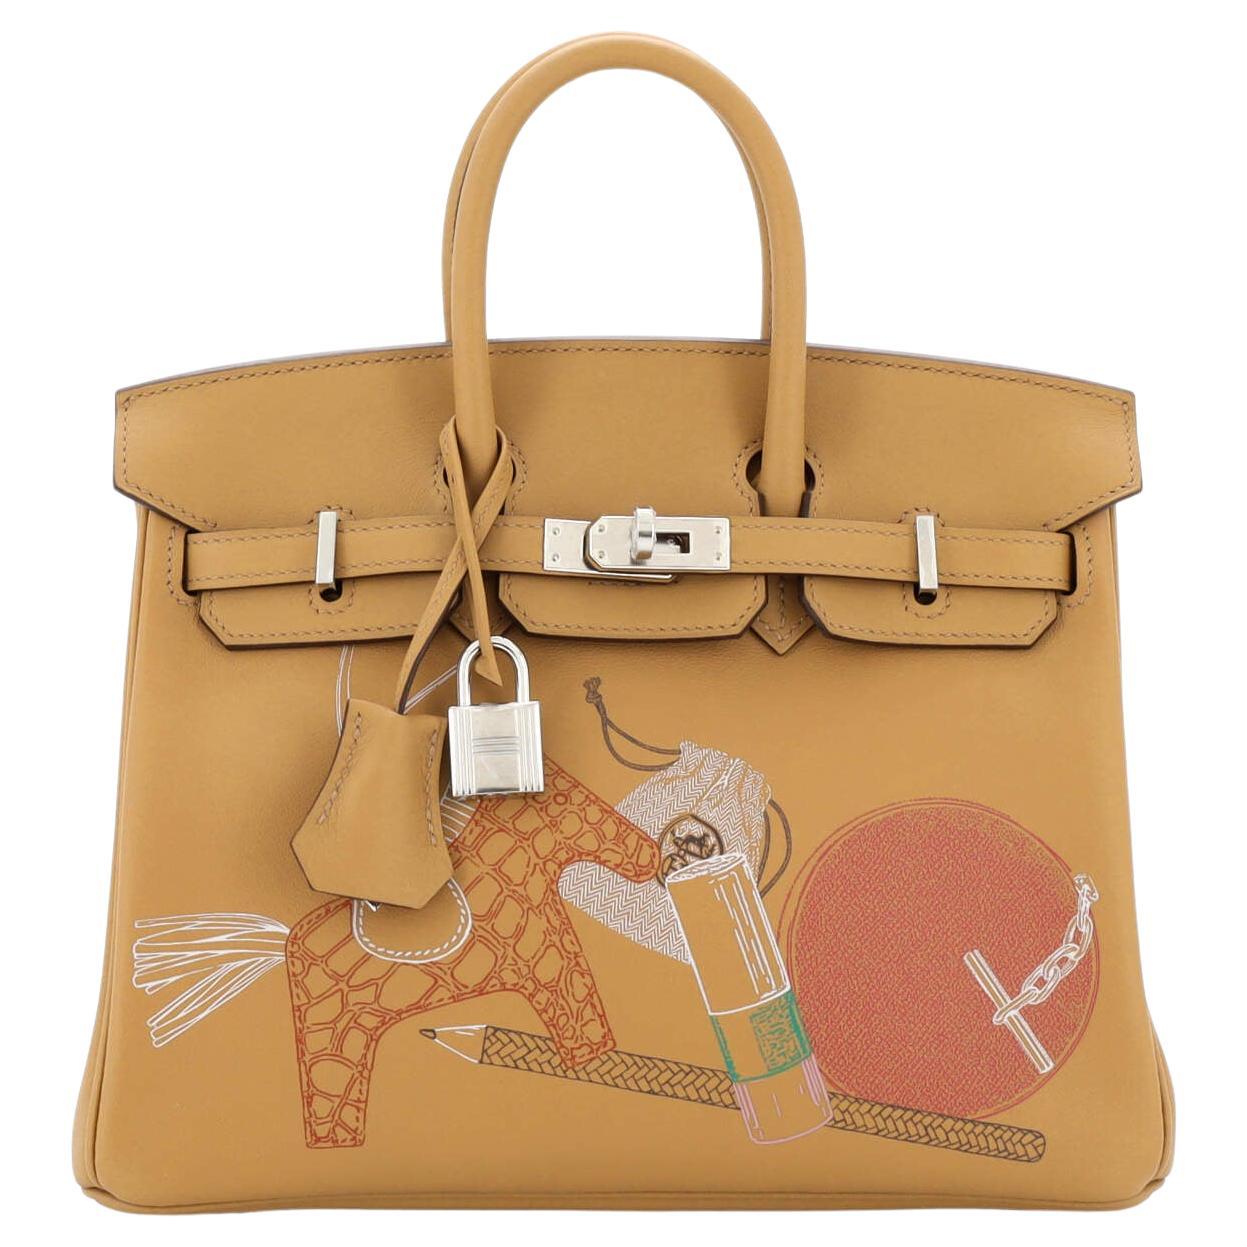 Hermes In and Out Birkin Bag Limited Edition Swift with Palladium Hardware 25 For Sale